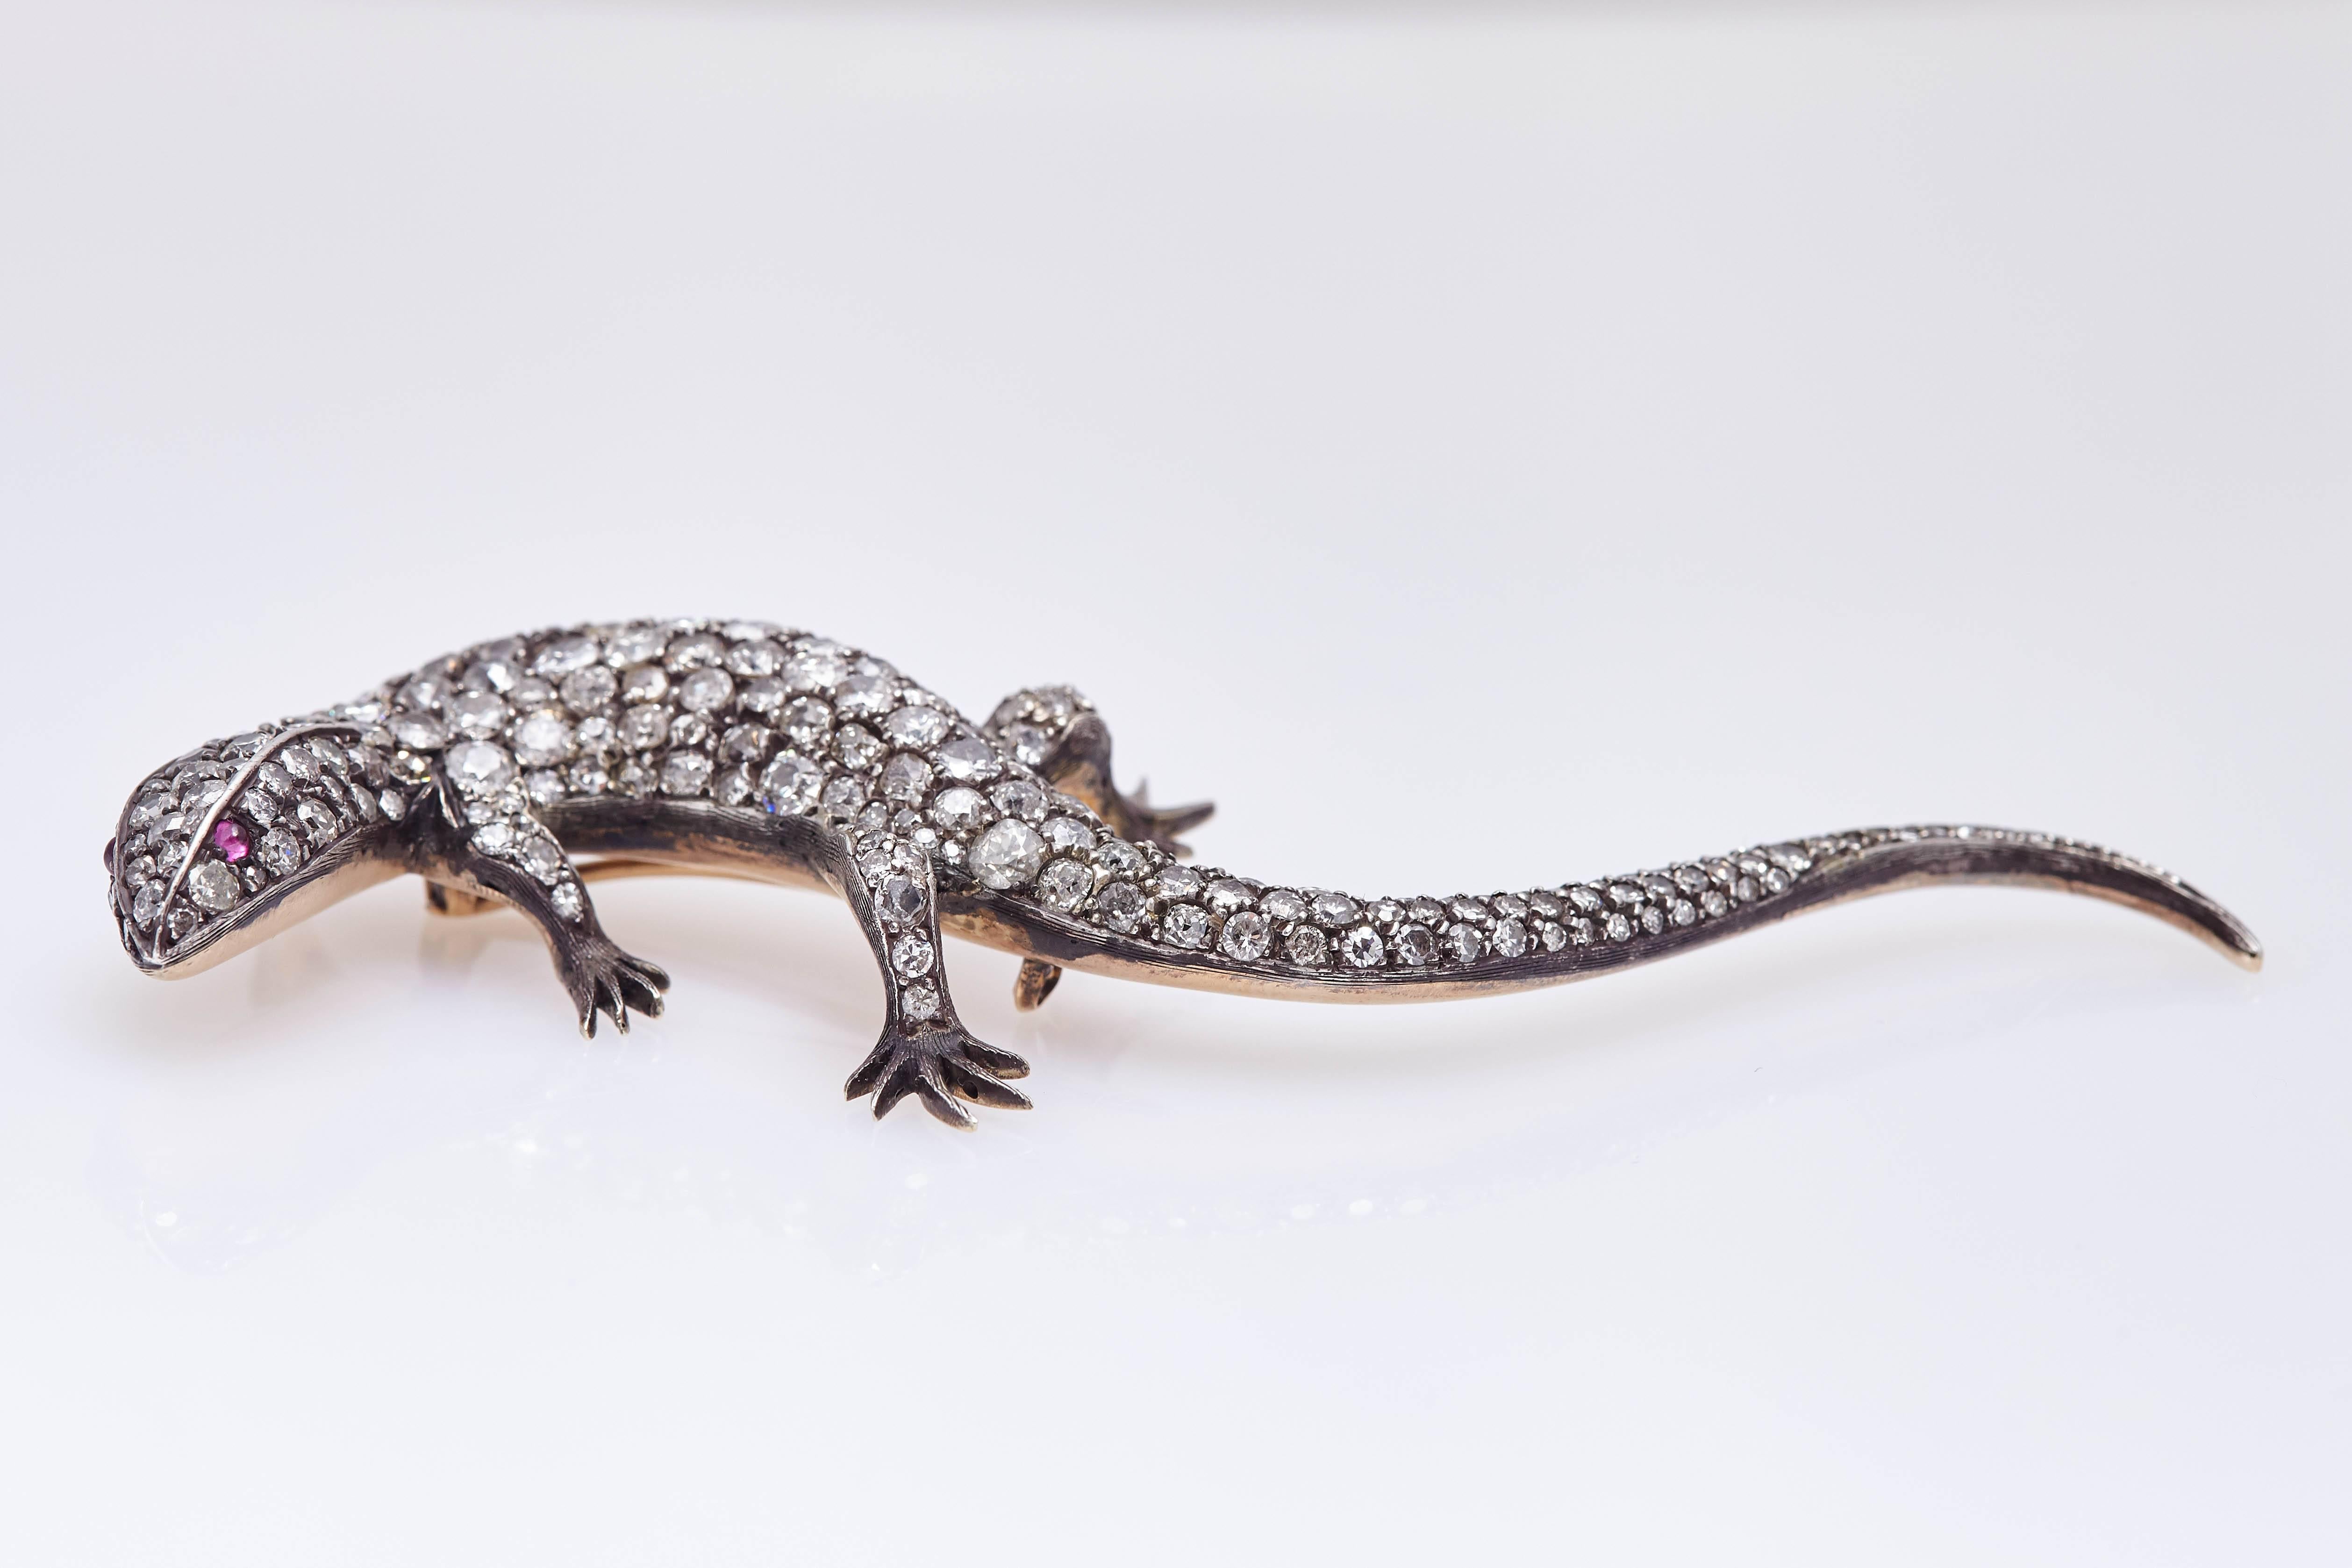 An impressive antique diamond Lizard brooch mounted on a mixed gold and silver mounting, typical of the time. Made in Italy, circa 1890